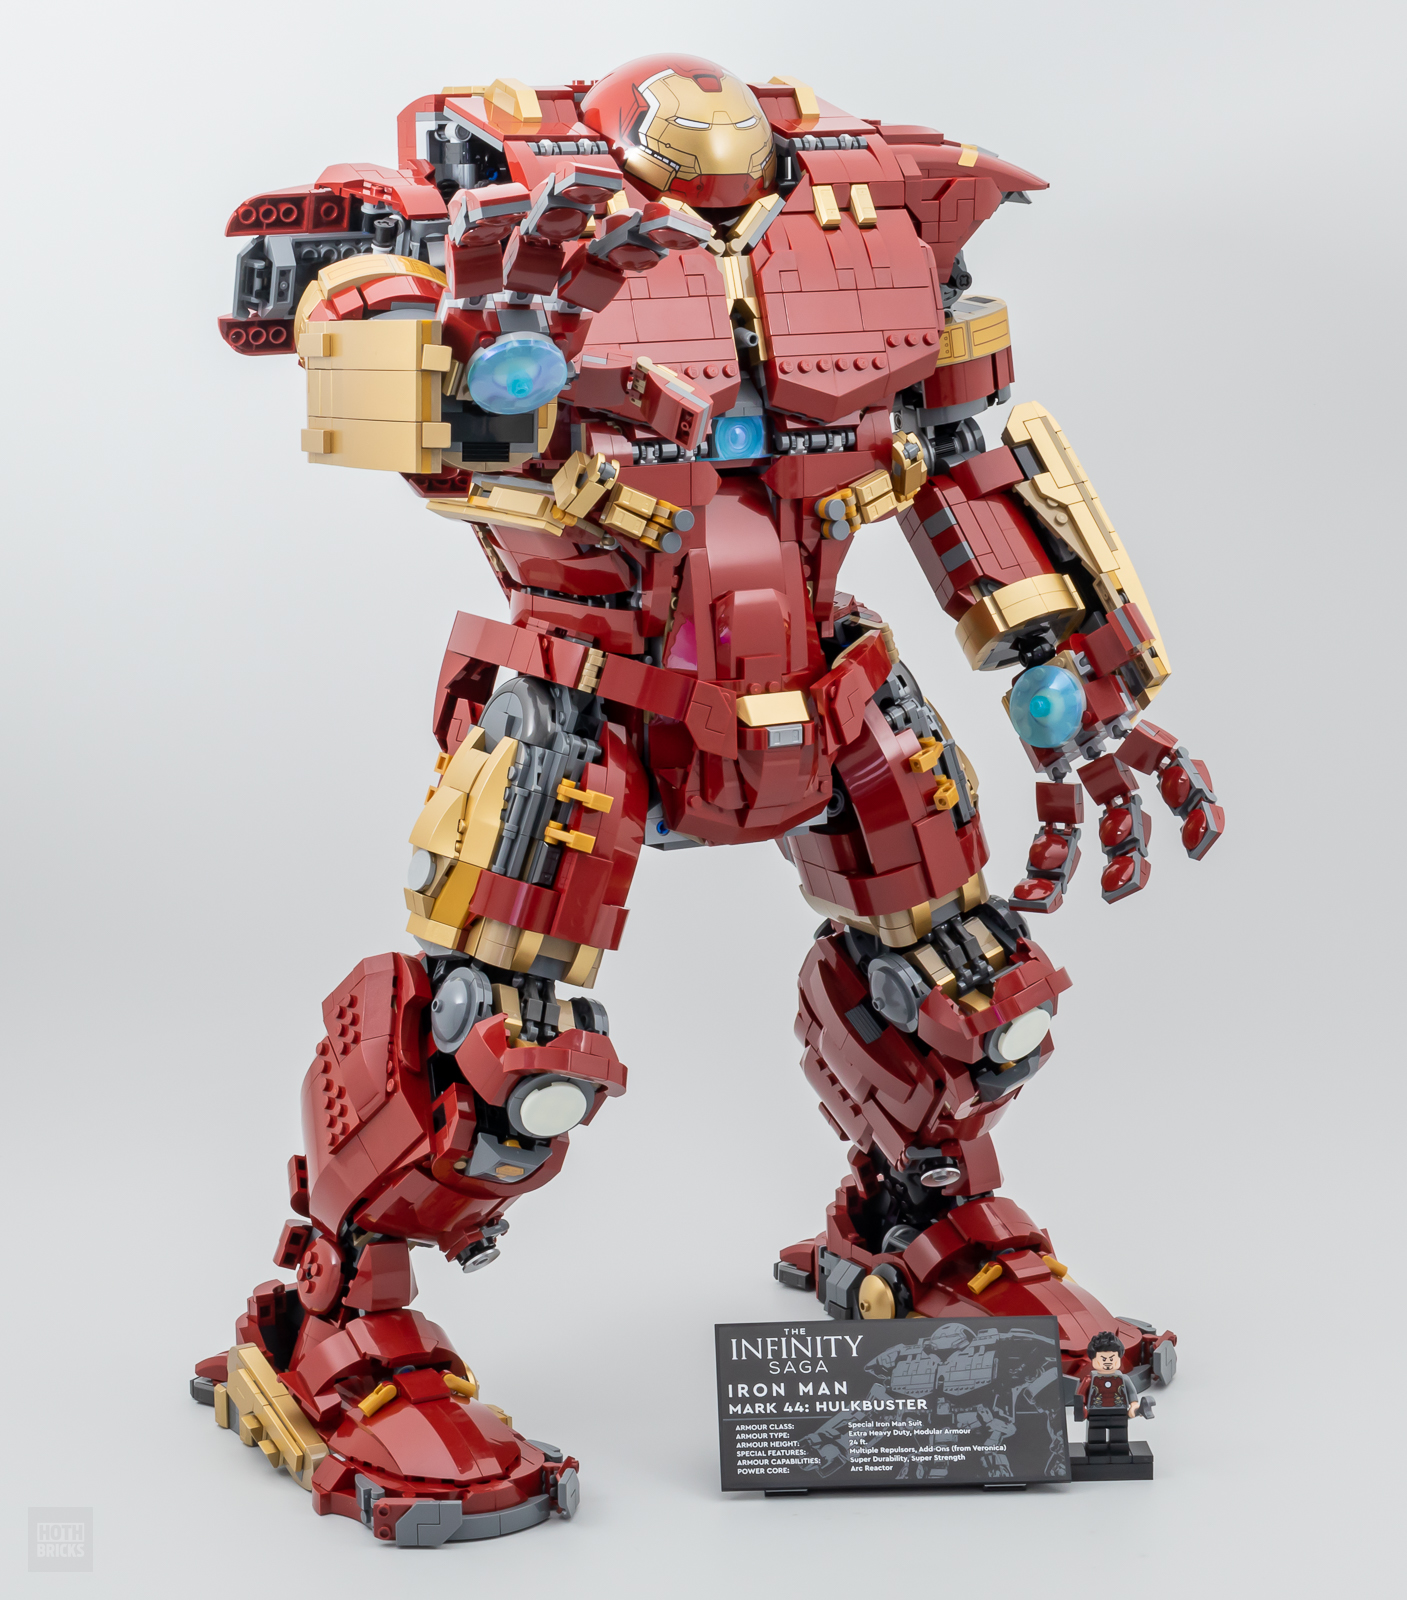 LEGO Marvel Super Heroes Hulkbuster 76210 by LEGO Systems Inc